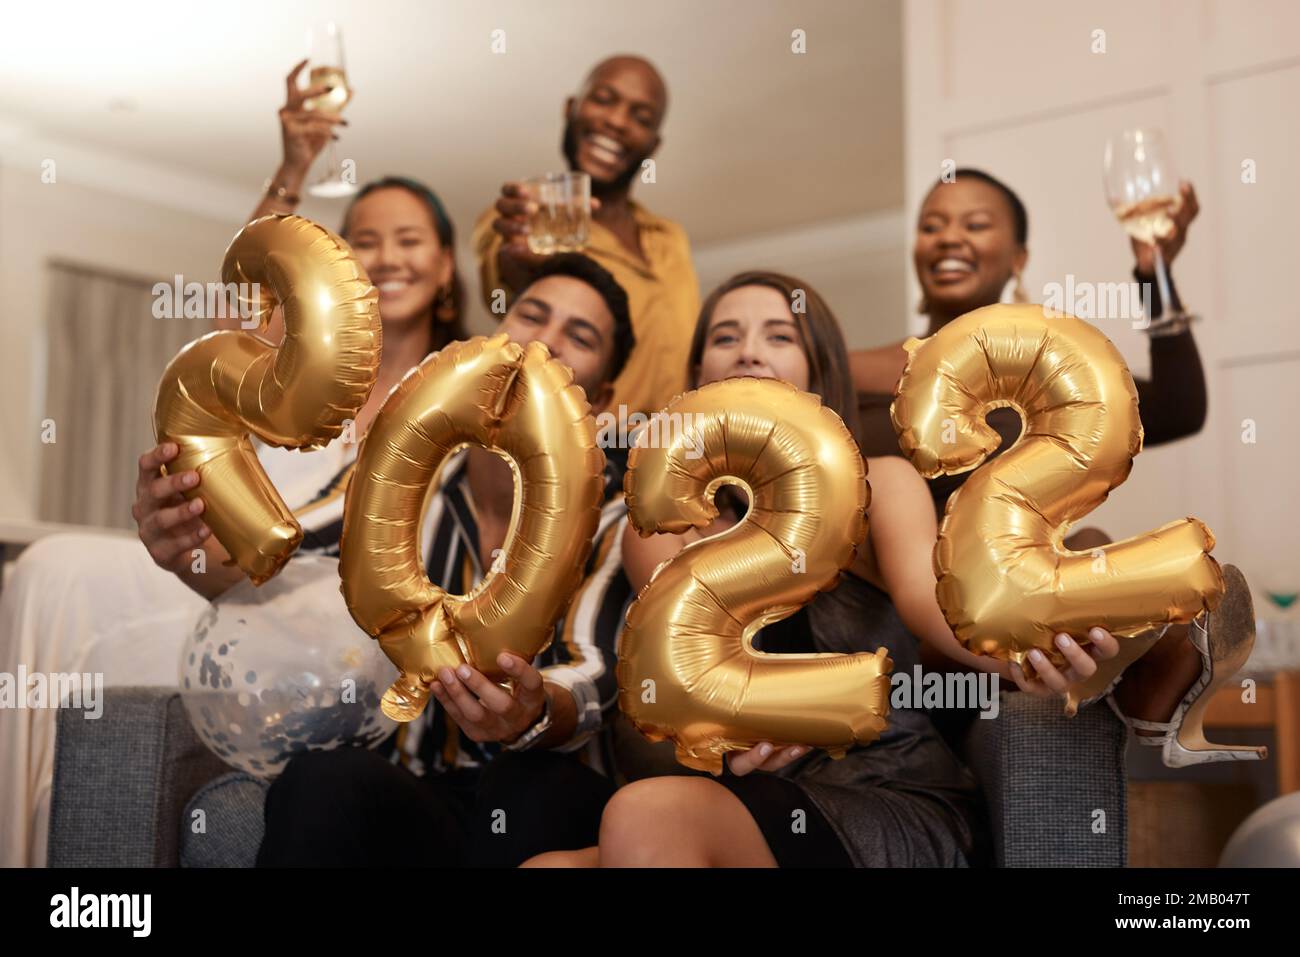 May the year be good to us. a diverse group of friends standing together and holding up 2022 balloons during a New Years party. Stock Photo